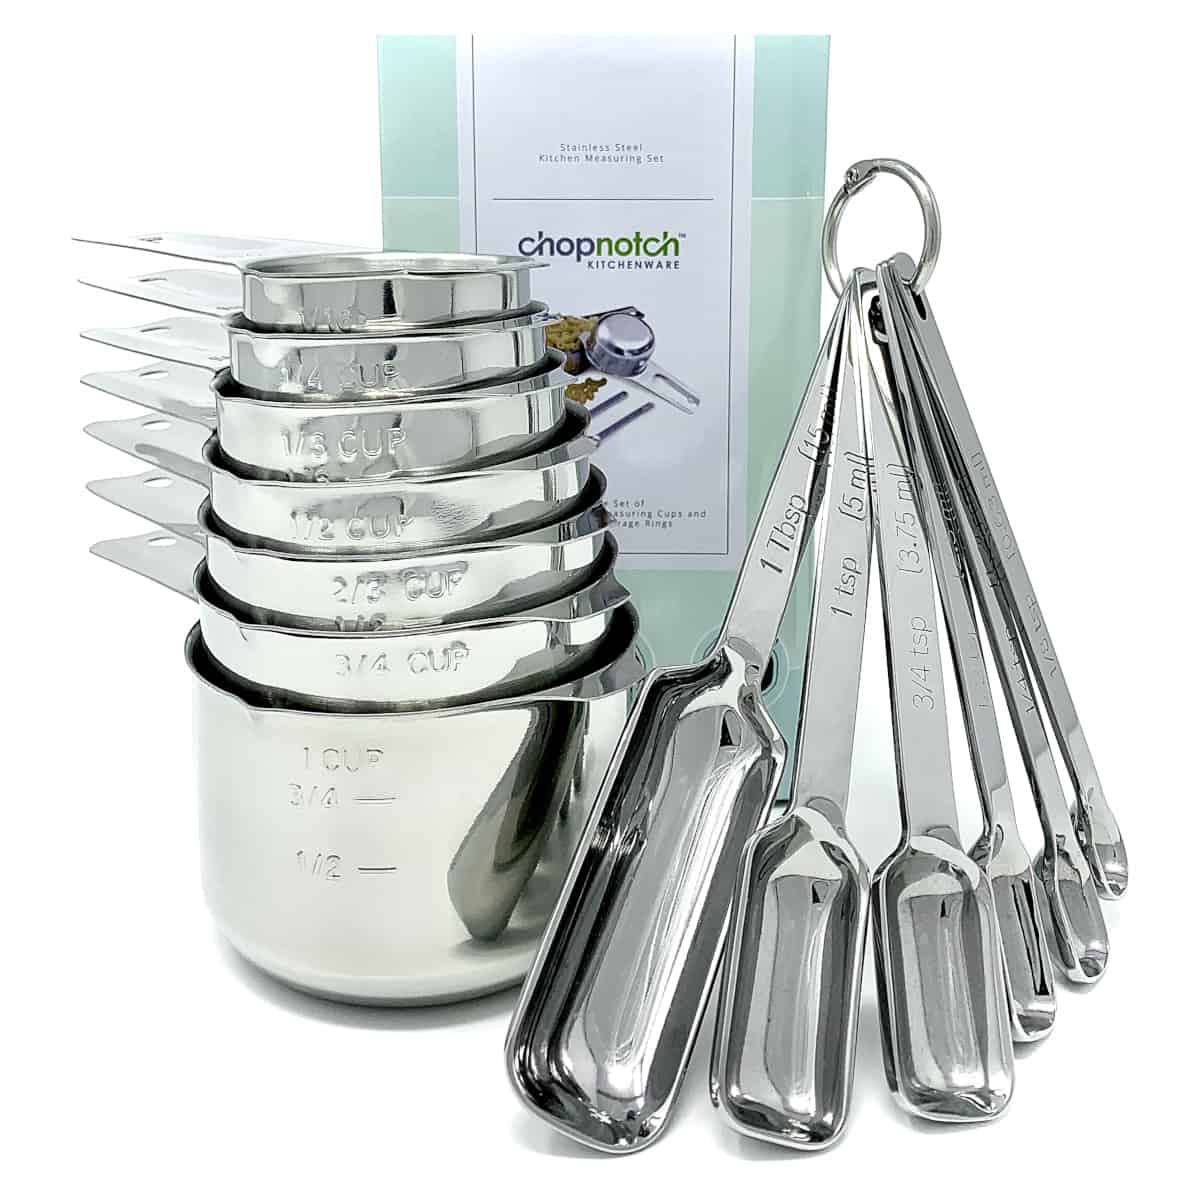 The Chopnotch measuring cups and spoons displayed with their box.